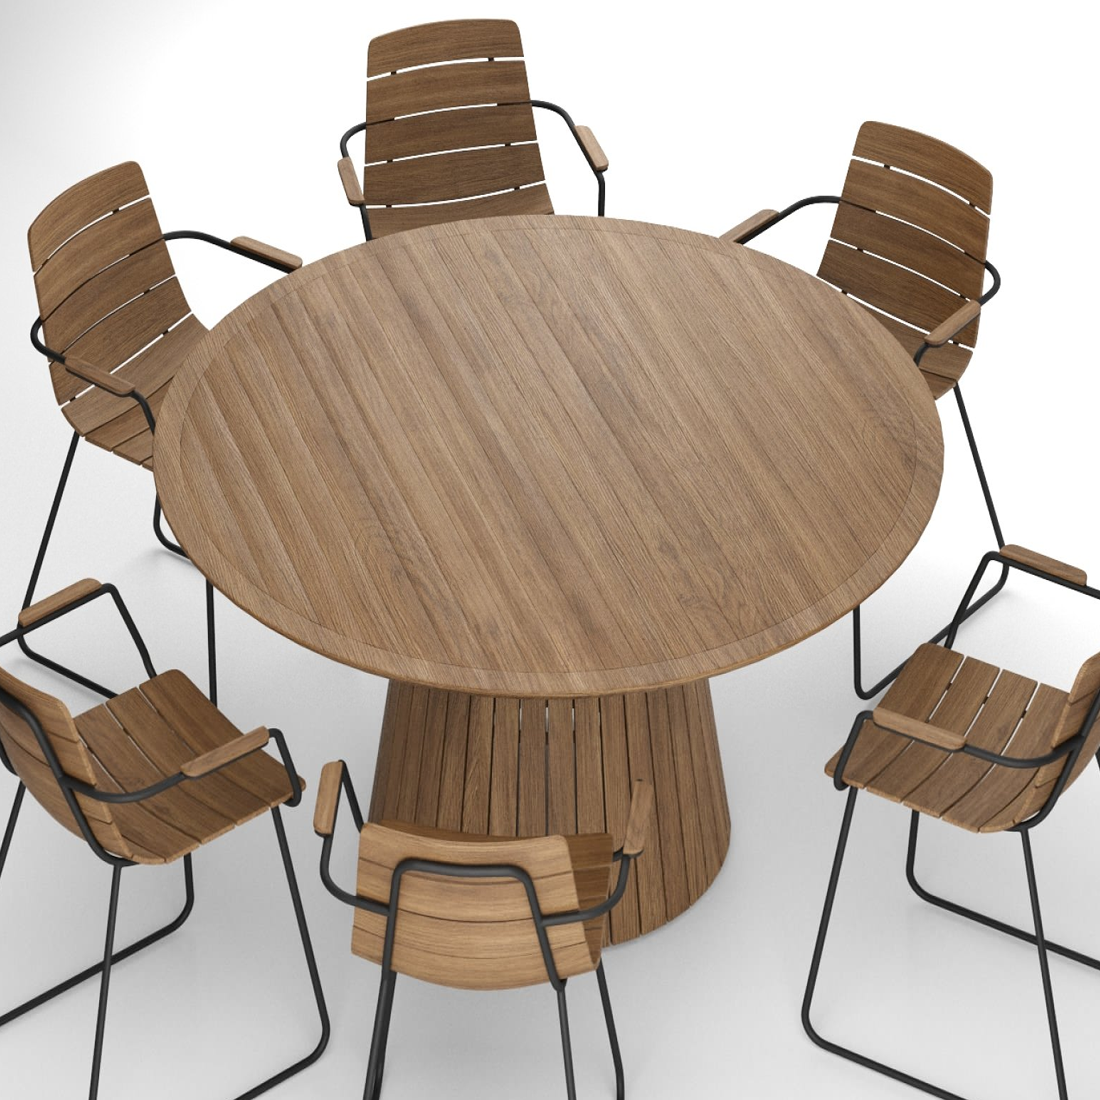 Images preview outdoor whirl round table with glost.